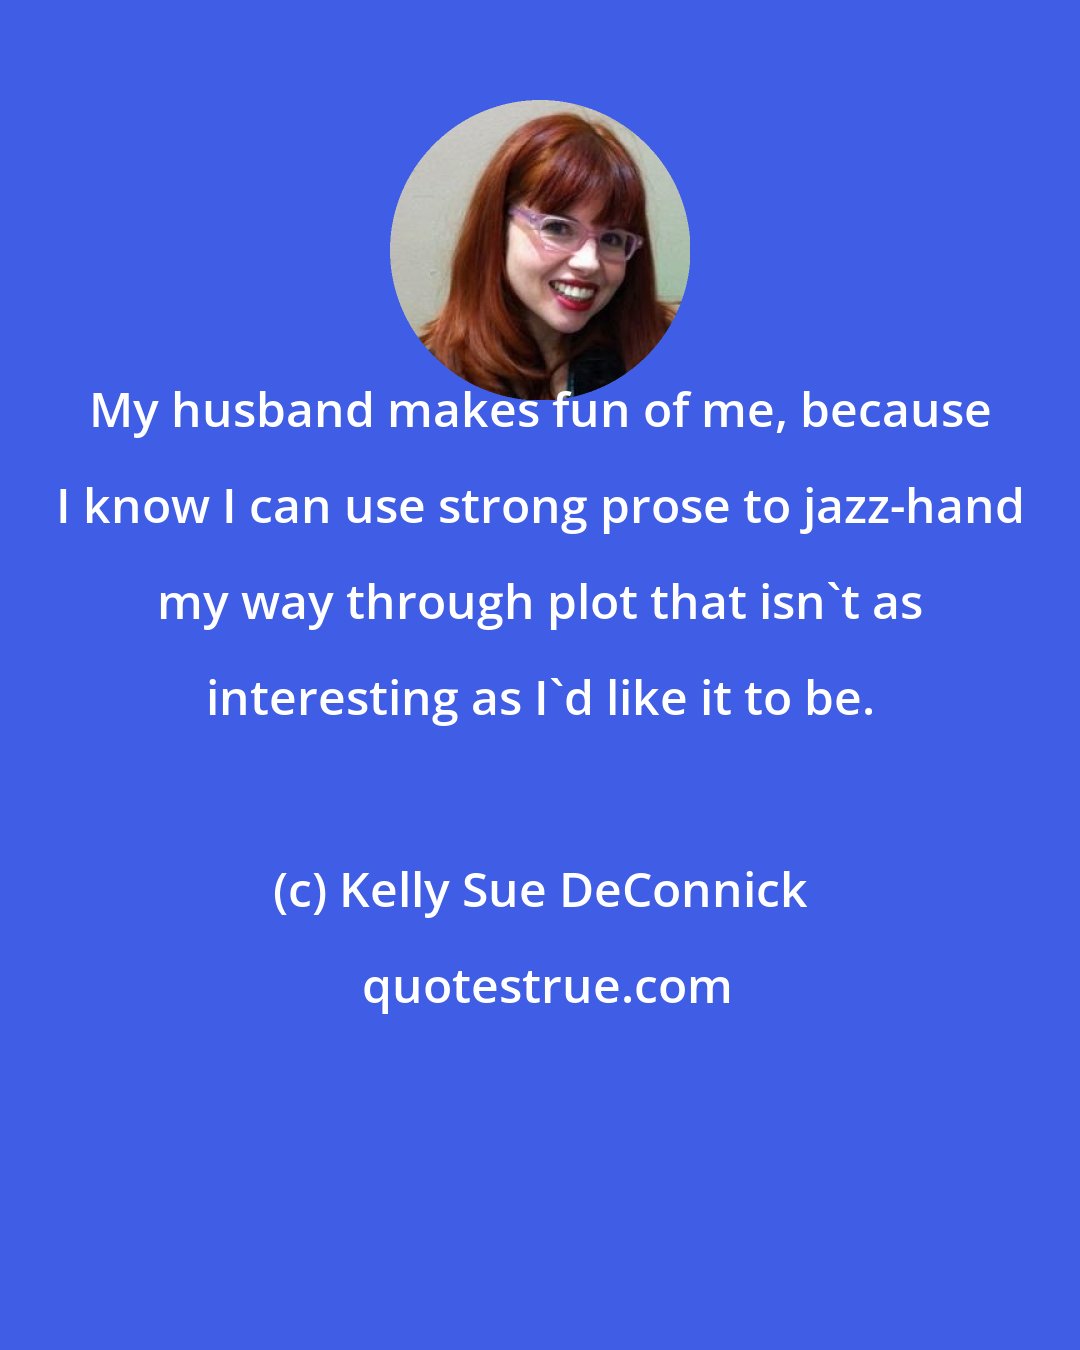 Kelly Sue DeConnick: My husband makes fun of me, because I know I can use strong prose to jazz-hand my way through plot that isn't as interesting as I'd like it to be.